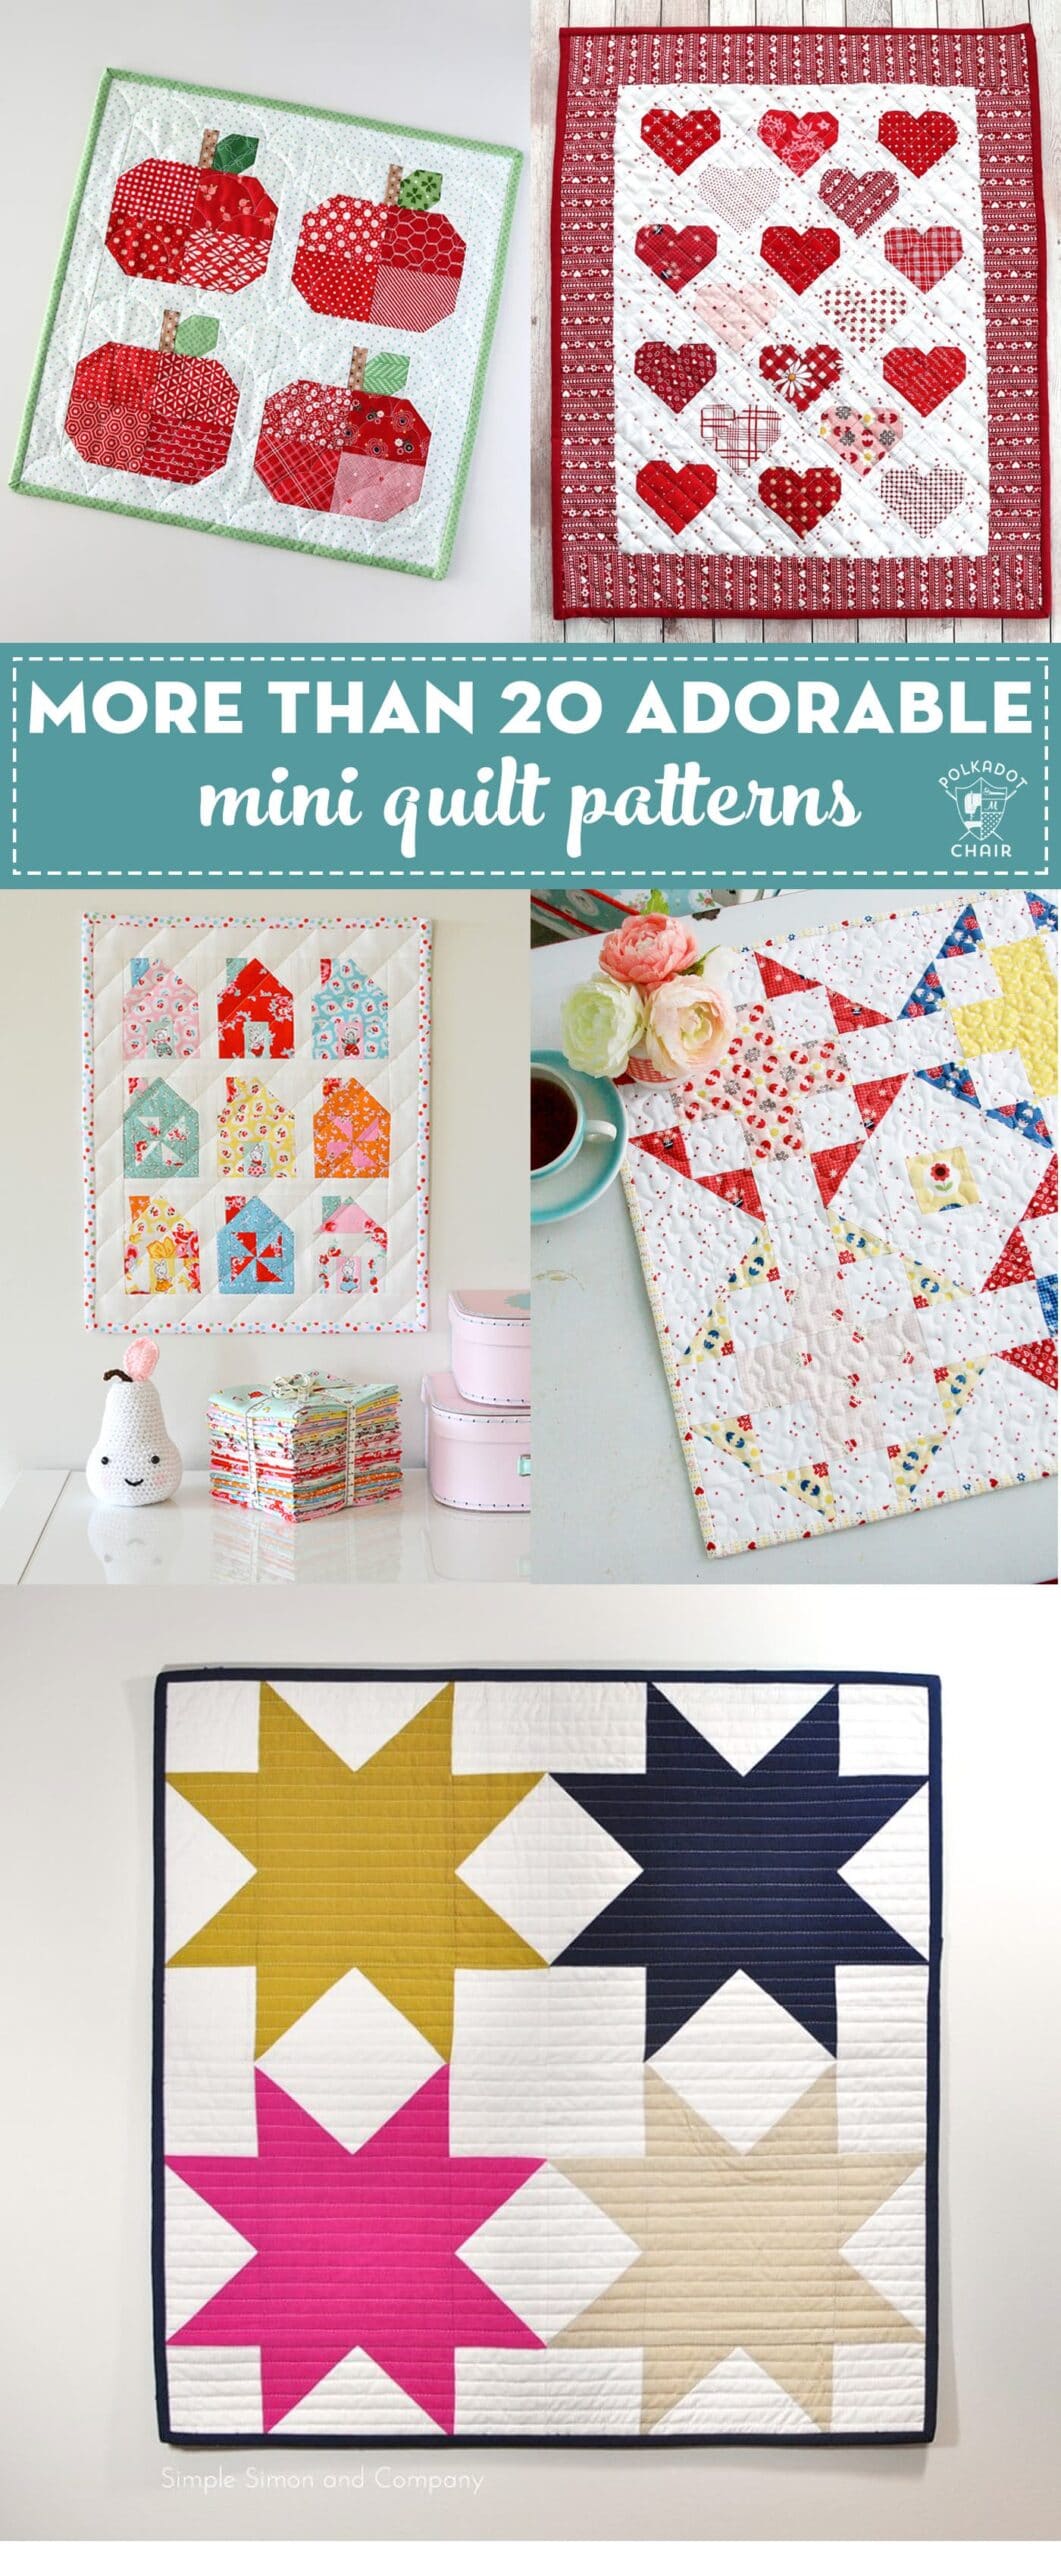 Small Quilts Made Easy Lot of 3 Quilting Pattern Books Little by Little Working in Miniature